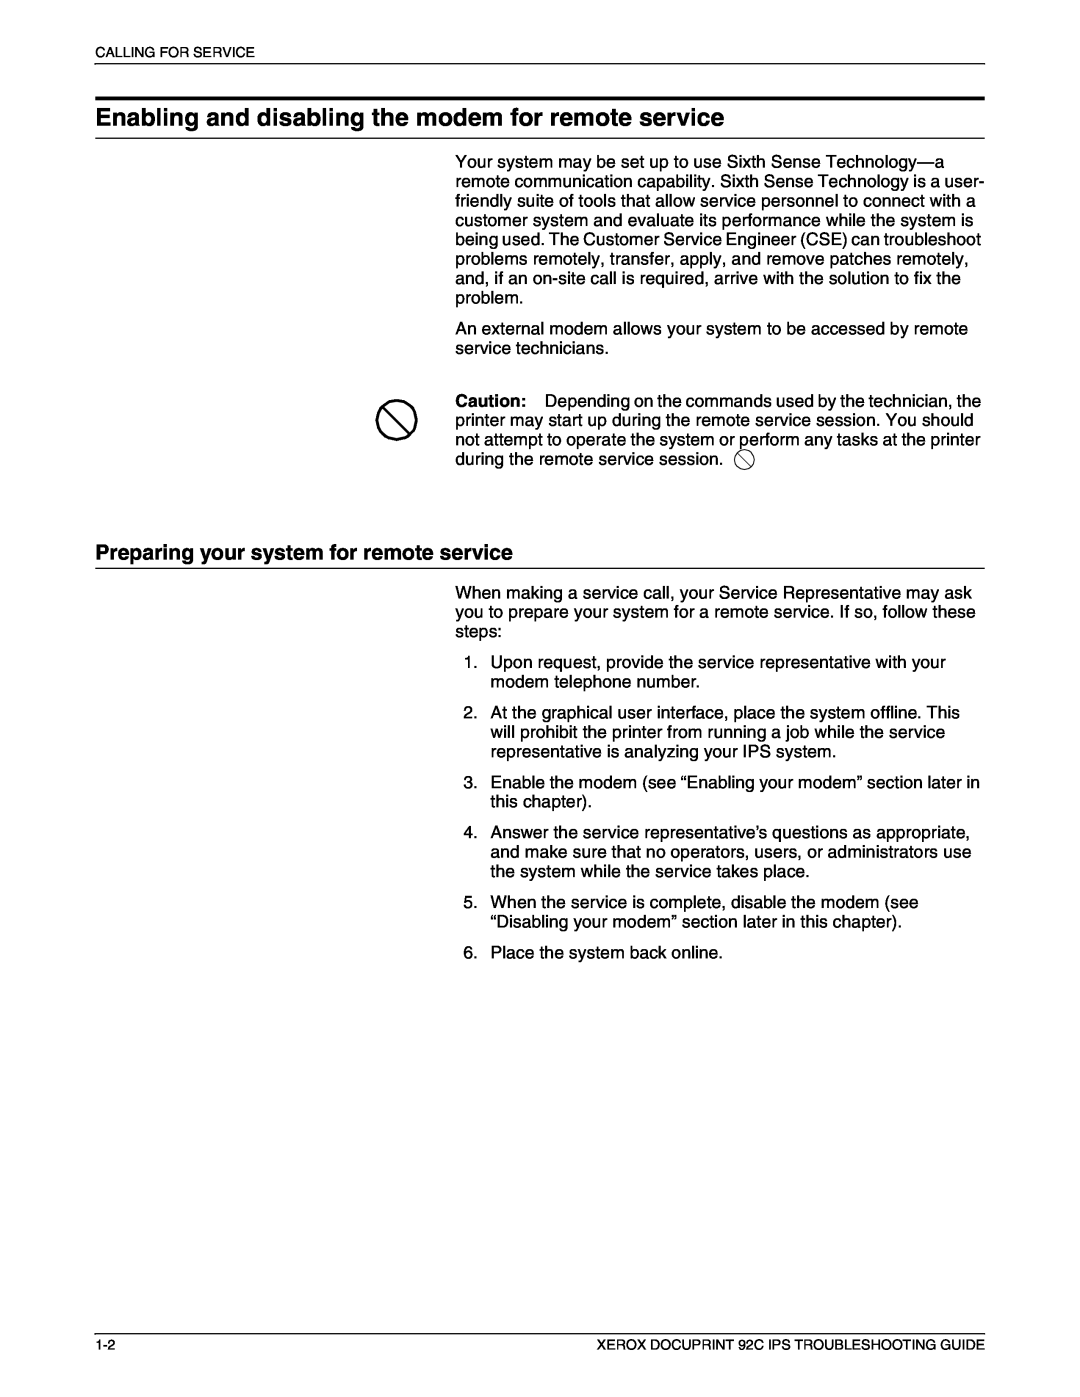 Xerox 92C IPS manual Enabling and disabling the modem for remote service, Preparing your system for remote service 